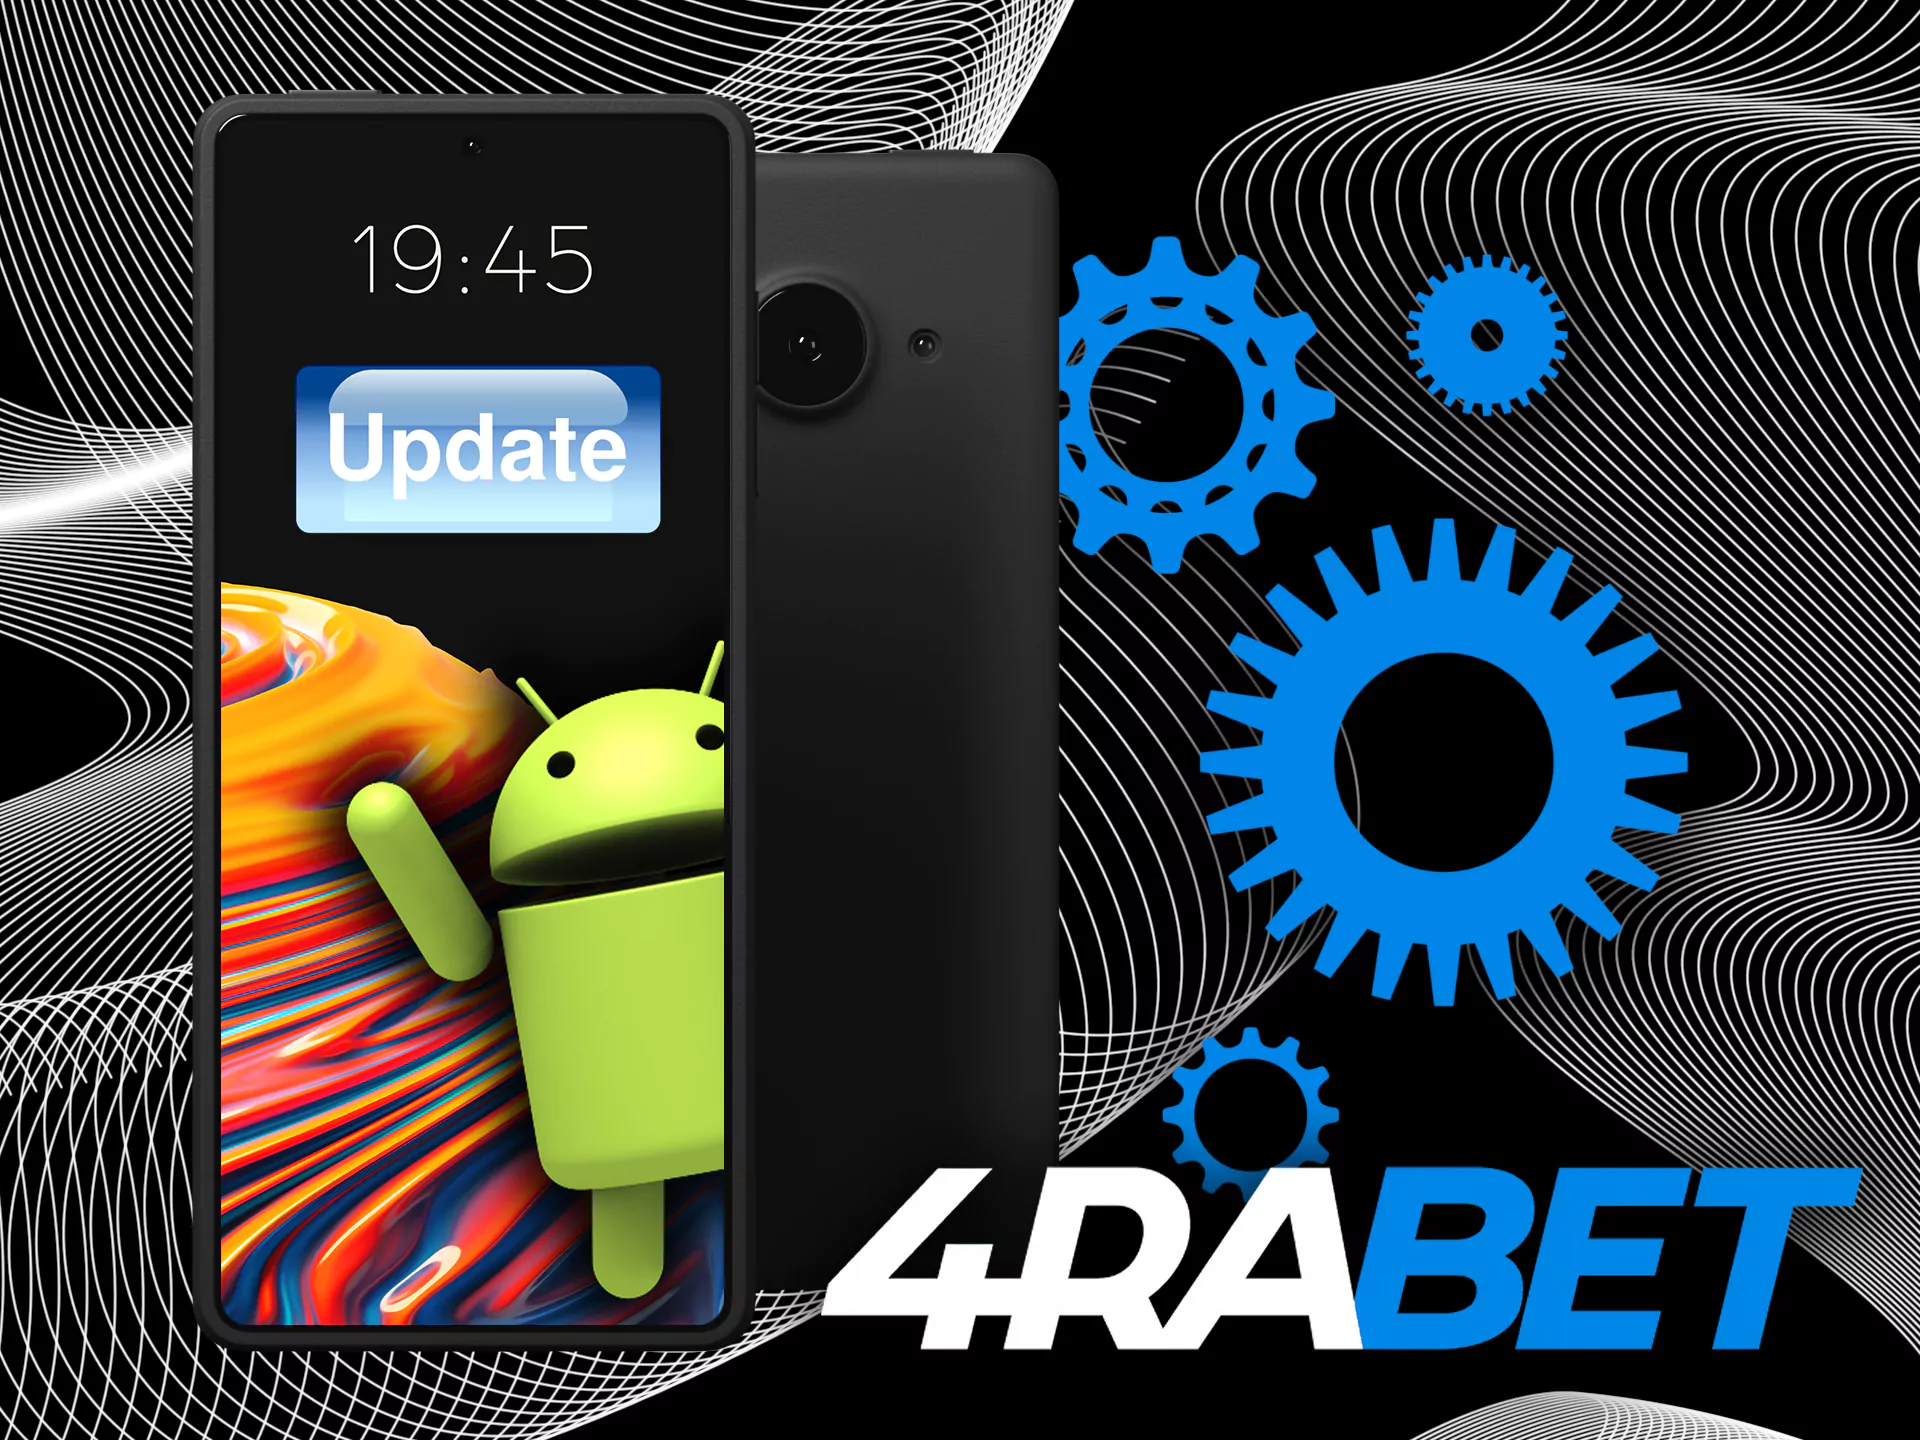 Setting up the 4rabet app for android smartphones to automatically update.